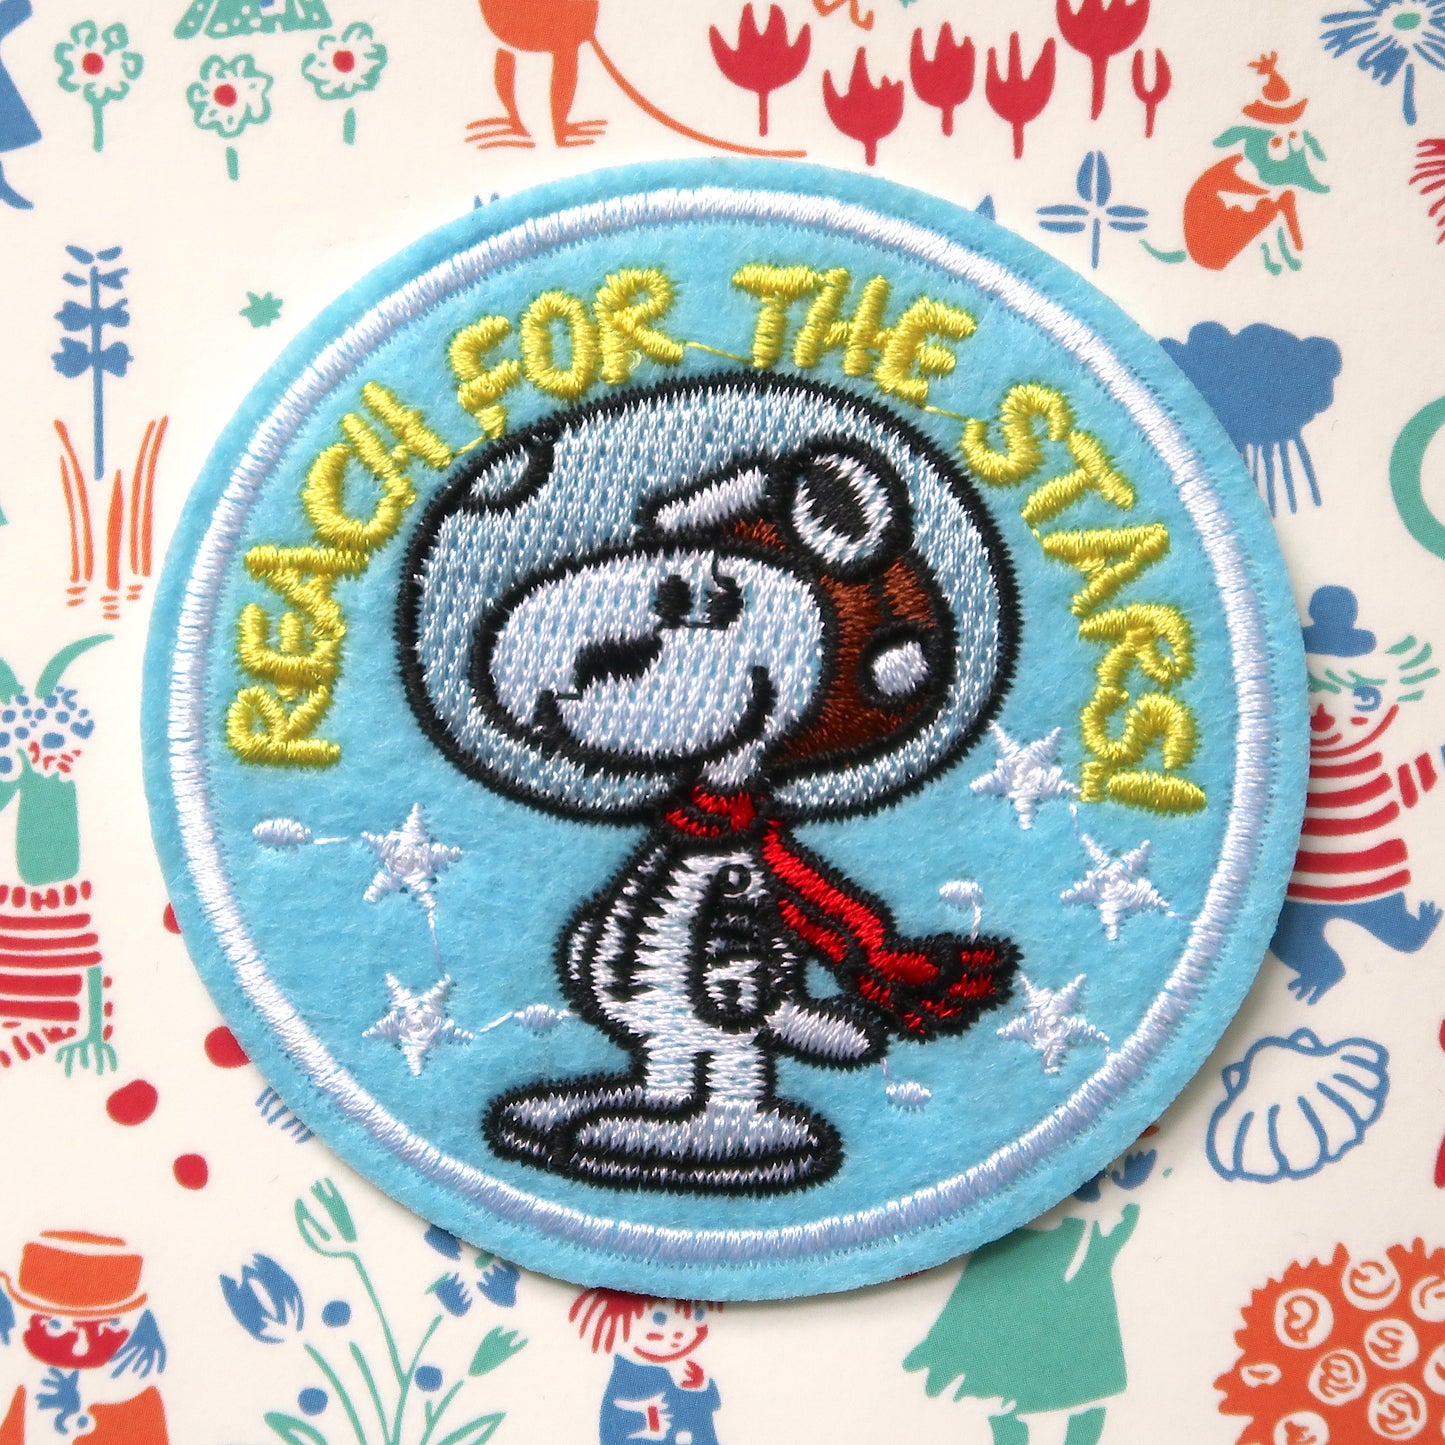 Snoopy Embroidery Patch // Astronaut Snoopy from the Peanuts comics "Reach for the stars" embroidered iron-on patch badge applique